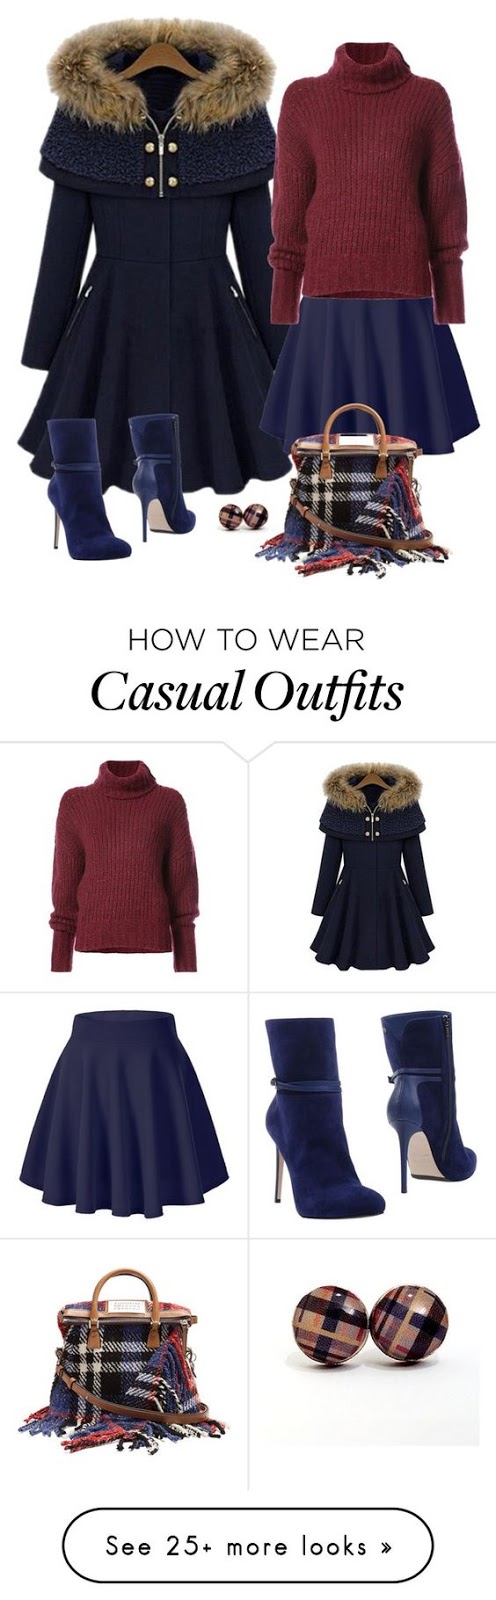 Casual Outfit Idea - Fashion Trends